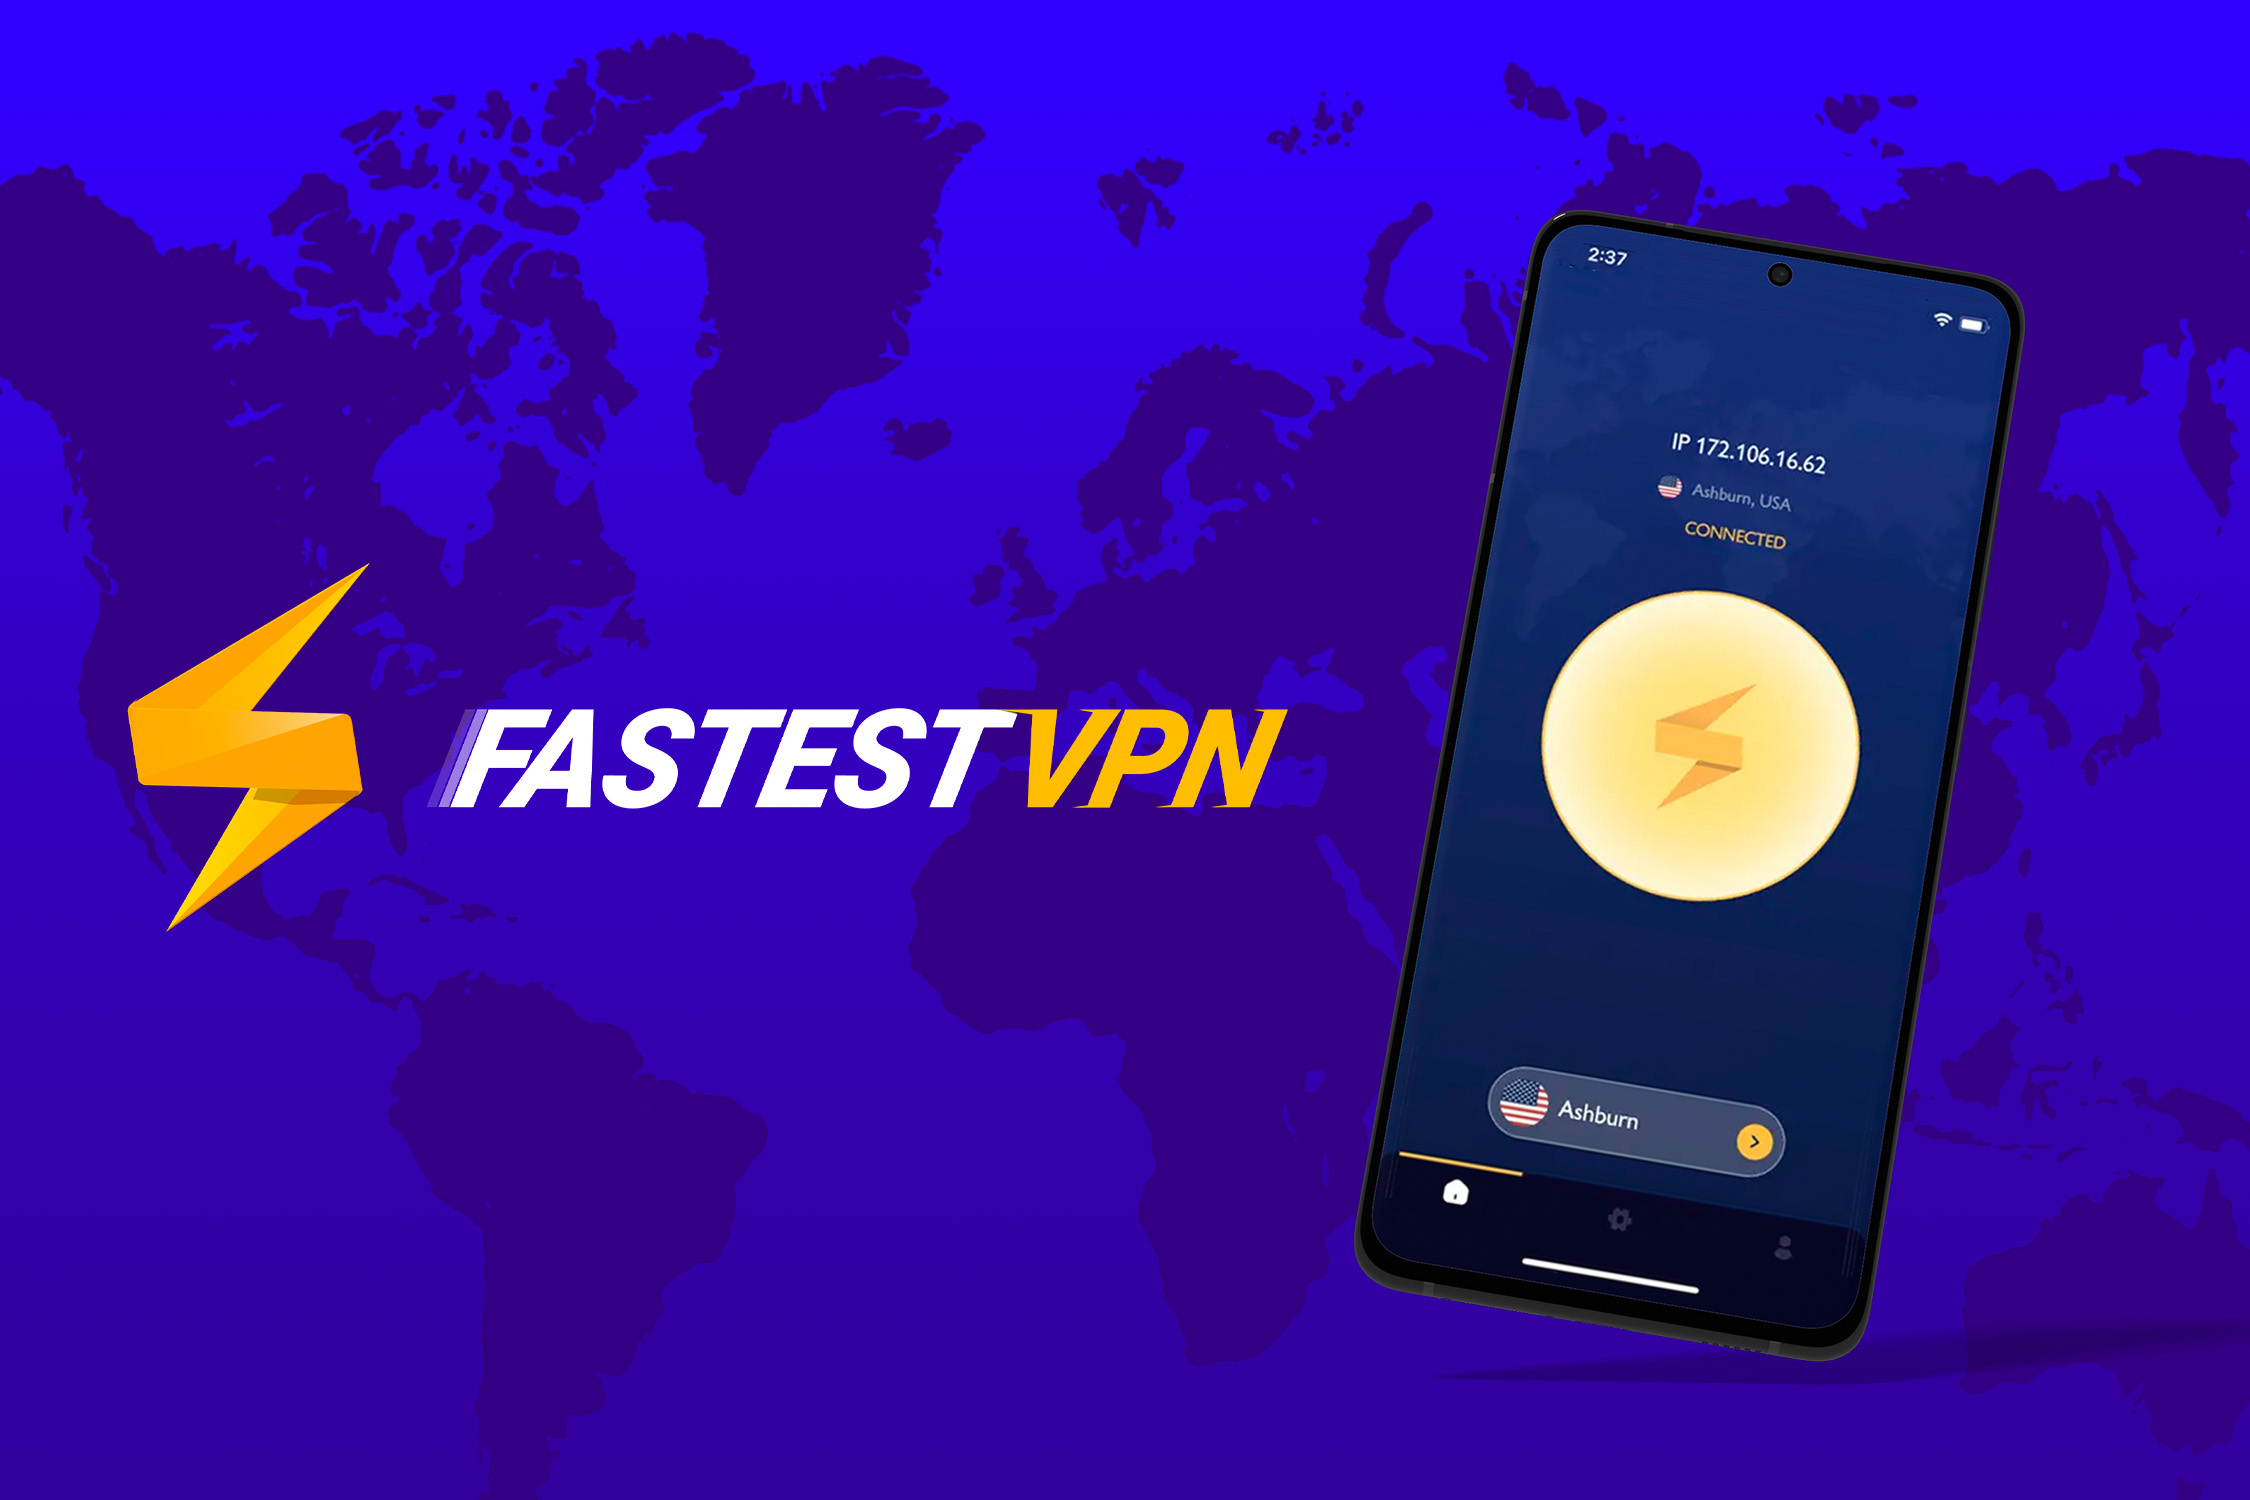 Secure up to ten devices with FastestVPN for $330 off